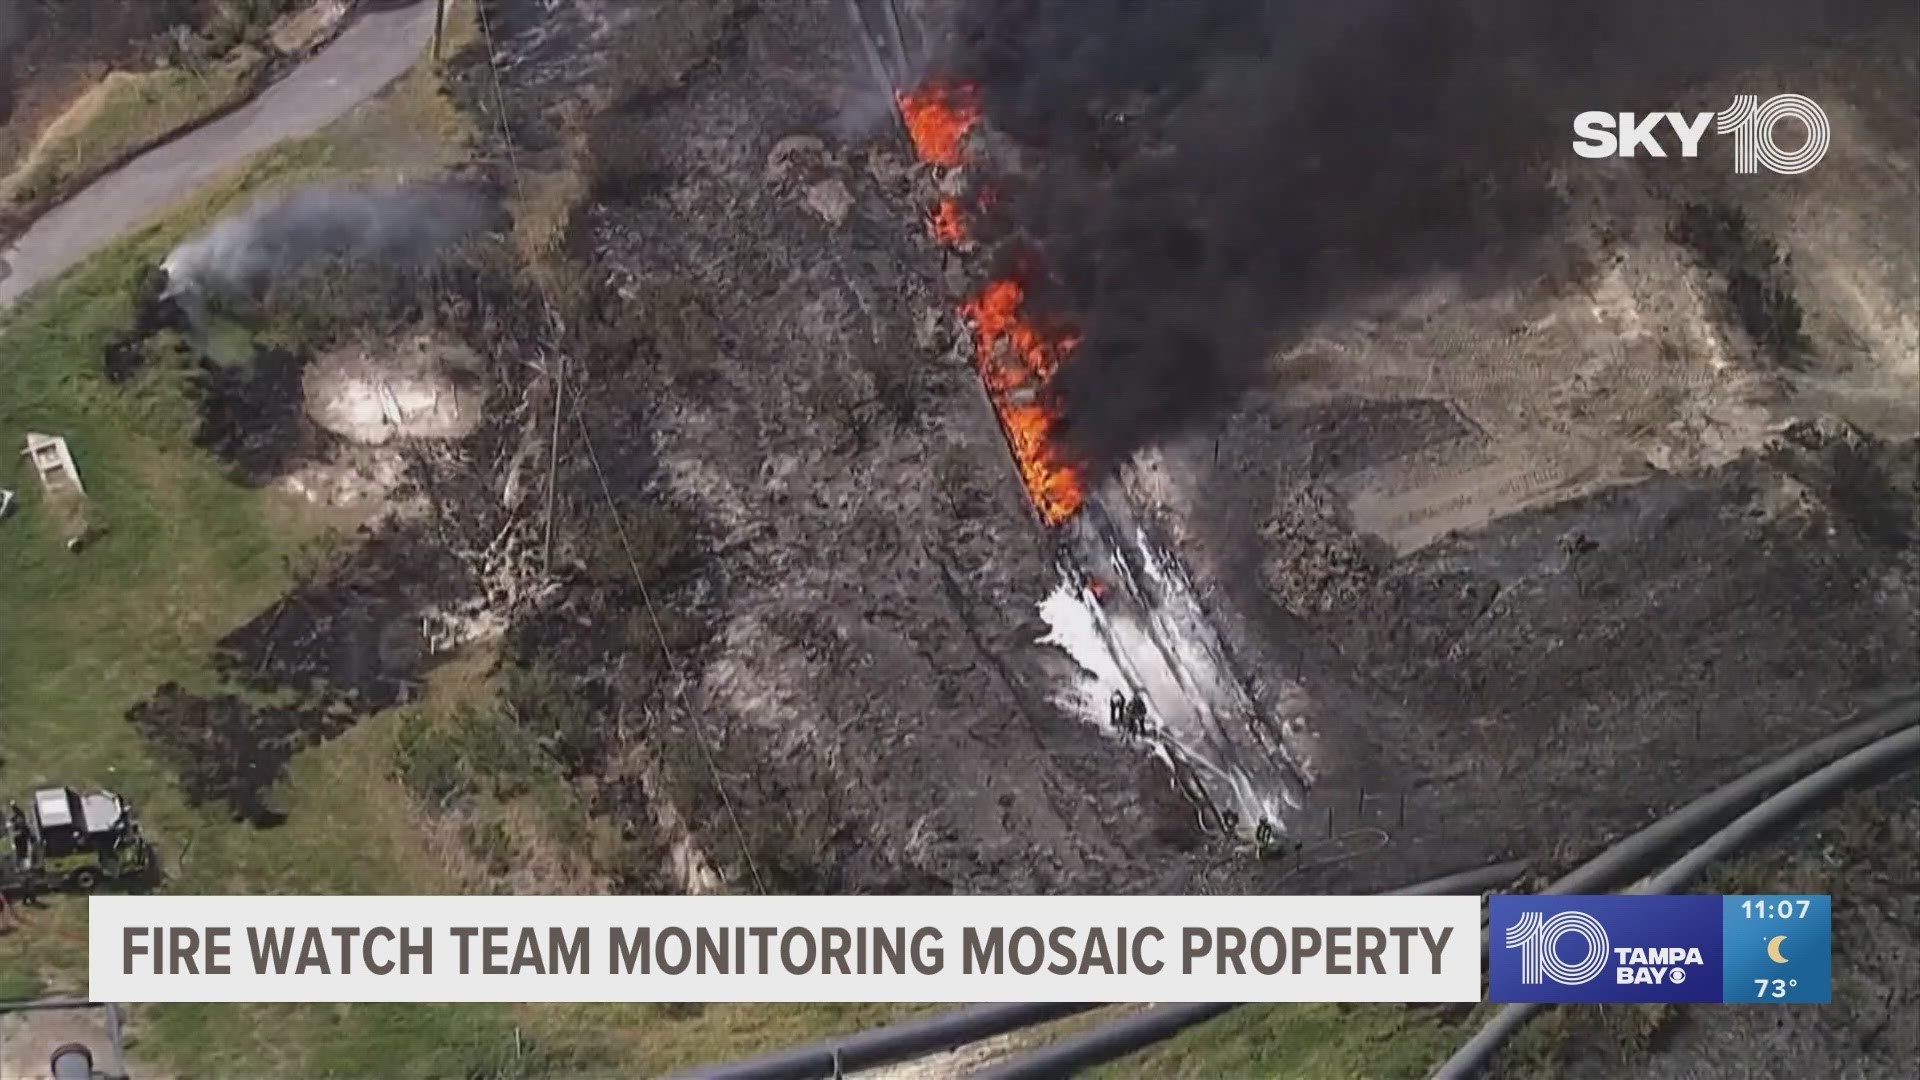 Mosaic emergency response, the Florida Forestry Service and HCFR worked in tandem to get the blaze under control.